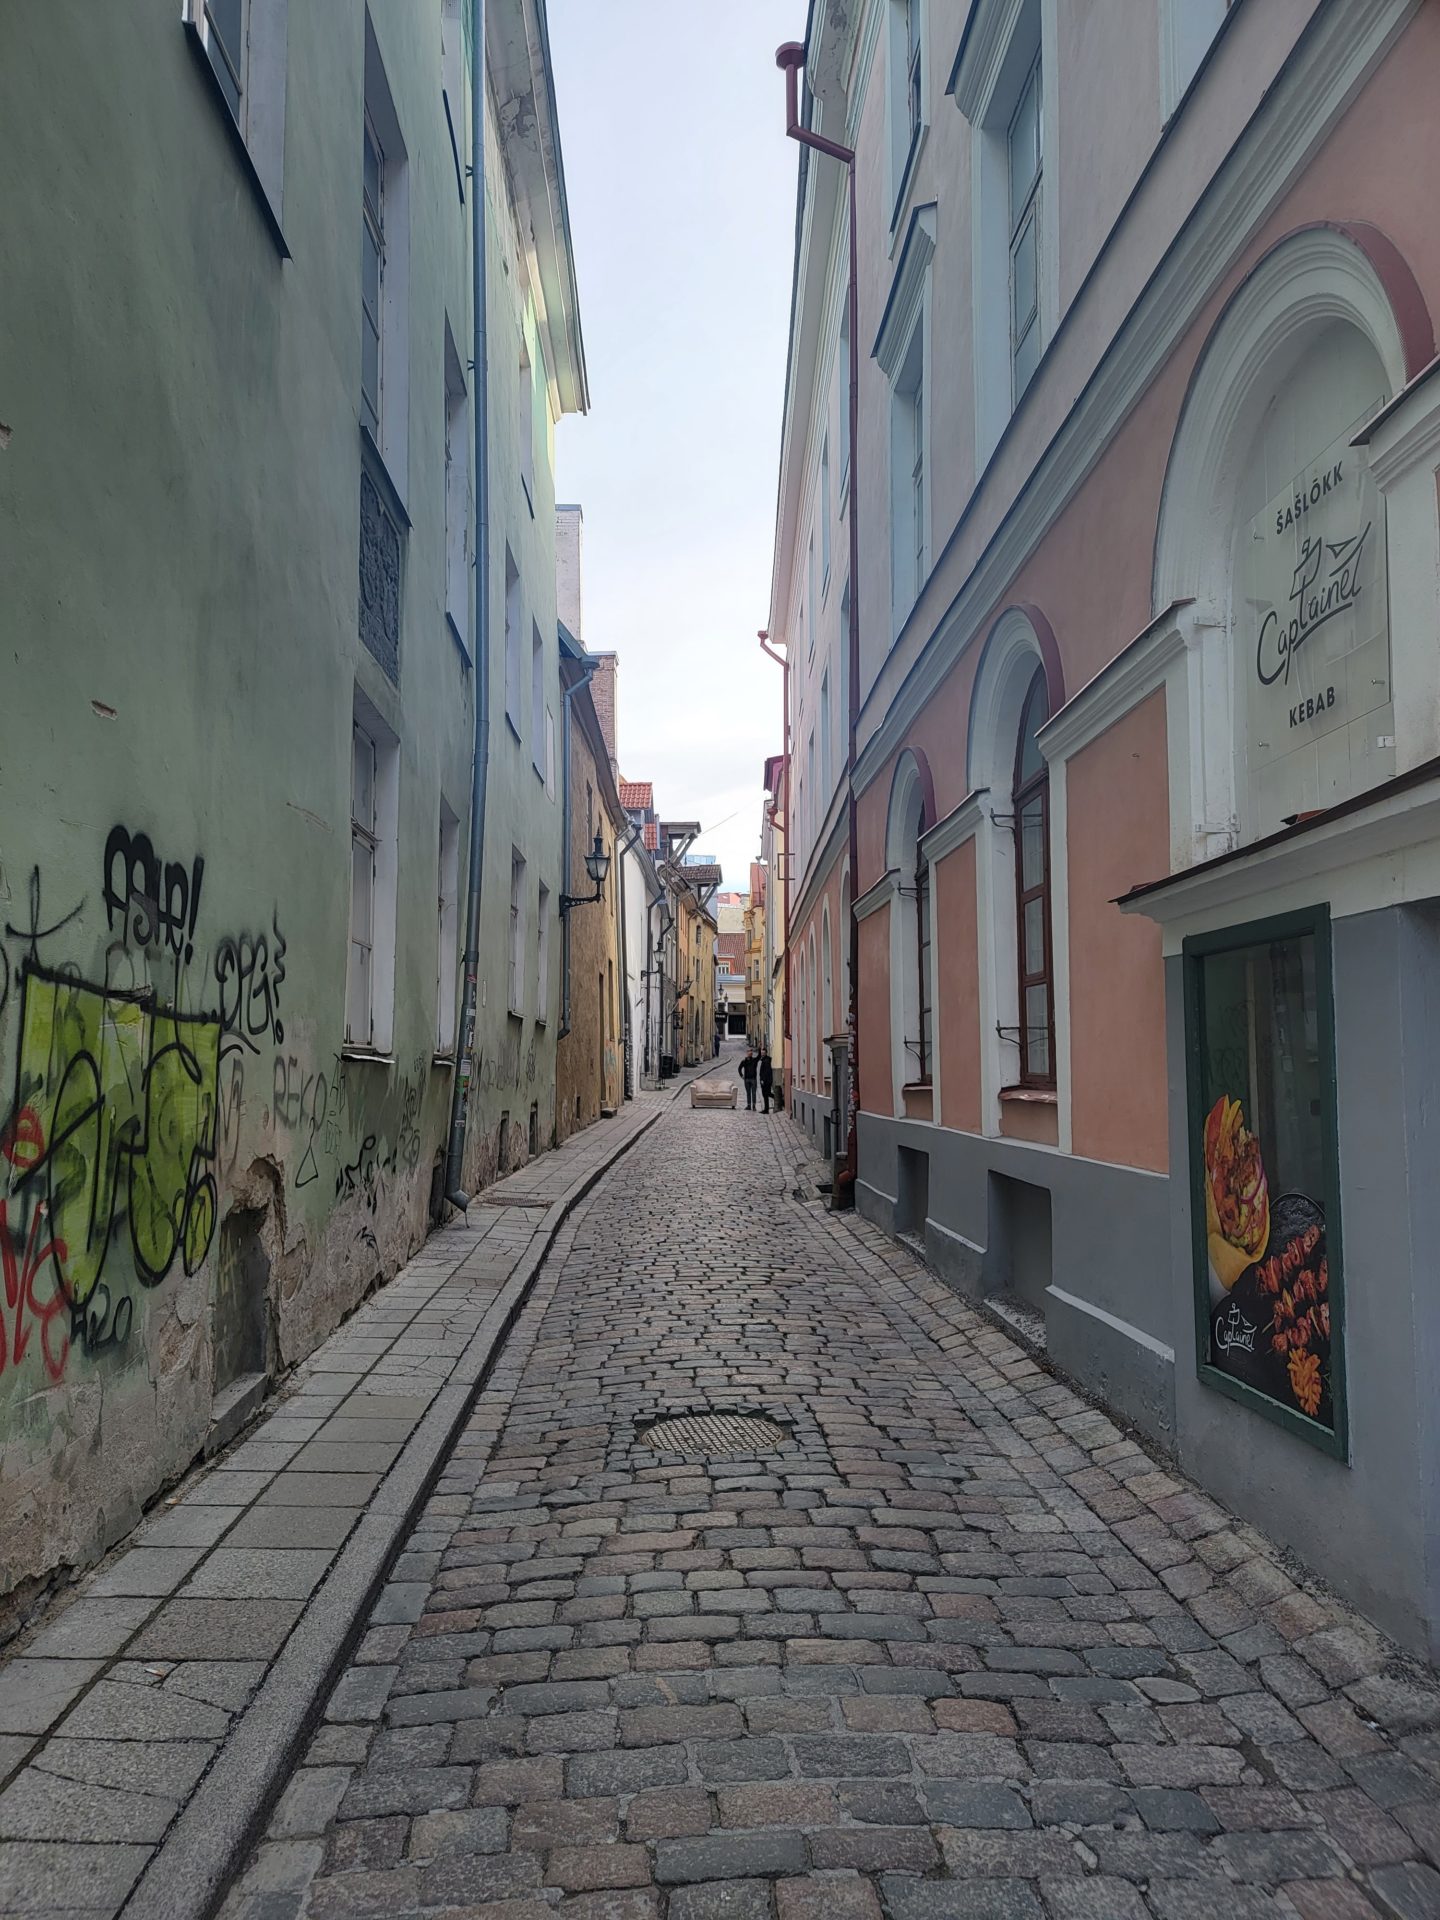 a stone alleyway with buildings and graffiti